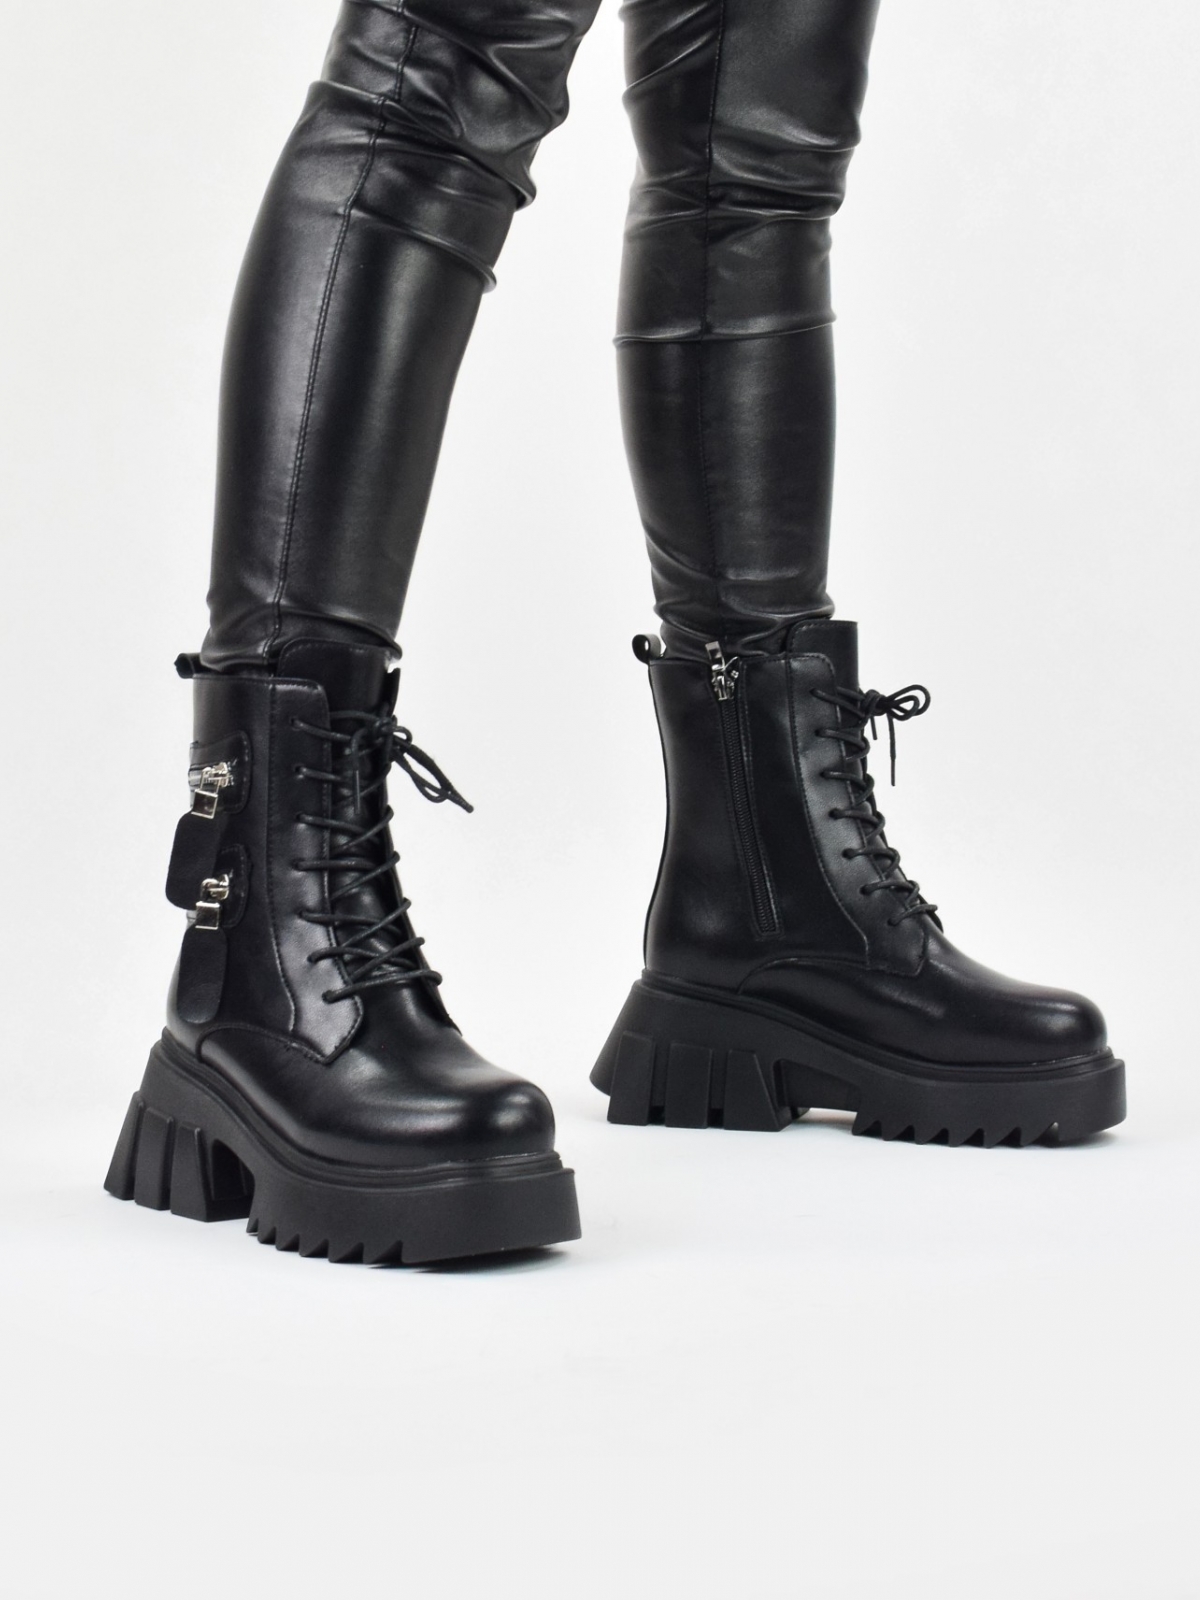 Chunky lace up ankle boots with side zip details in black